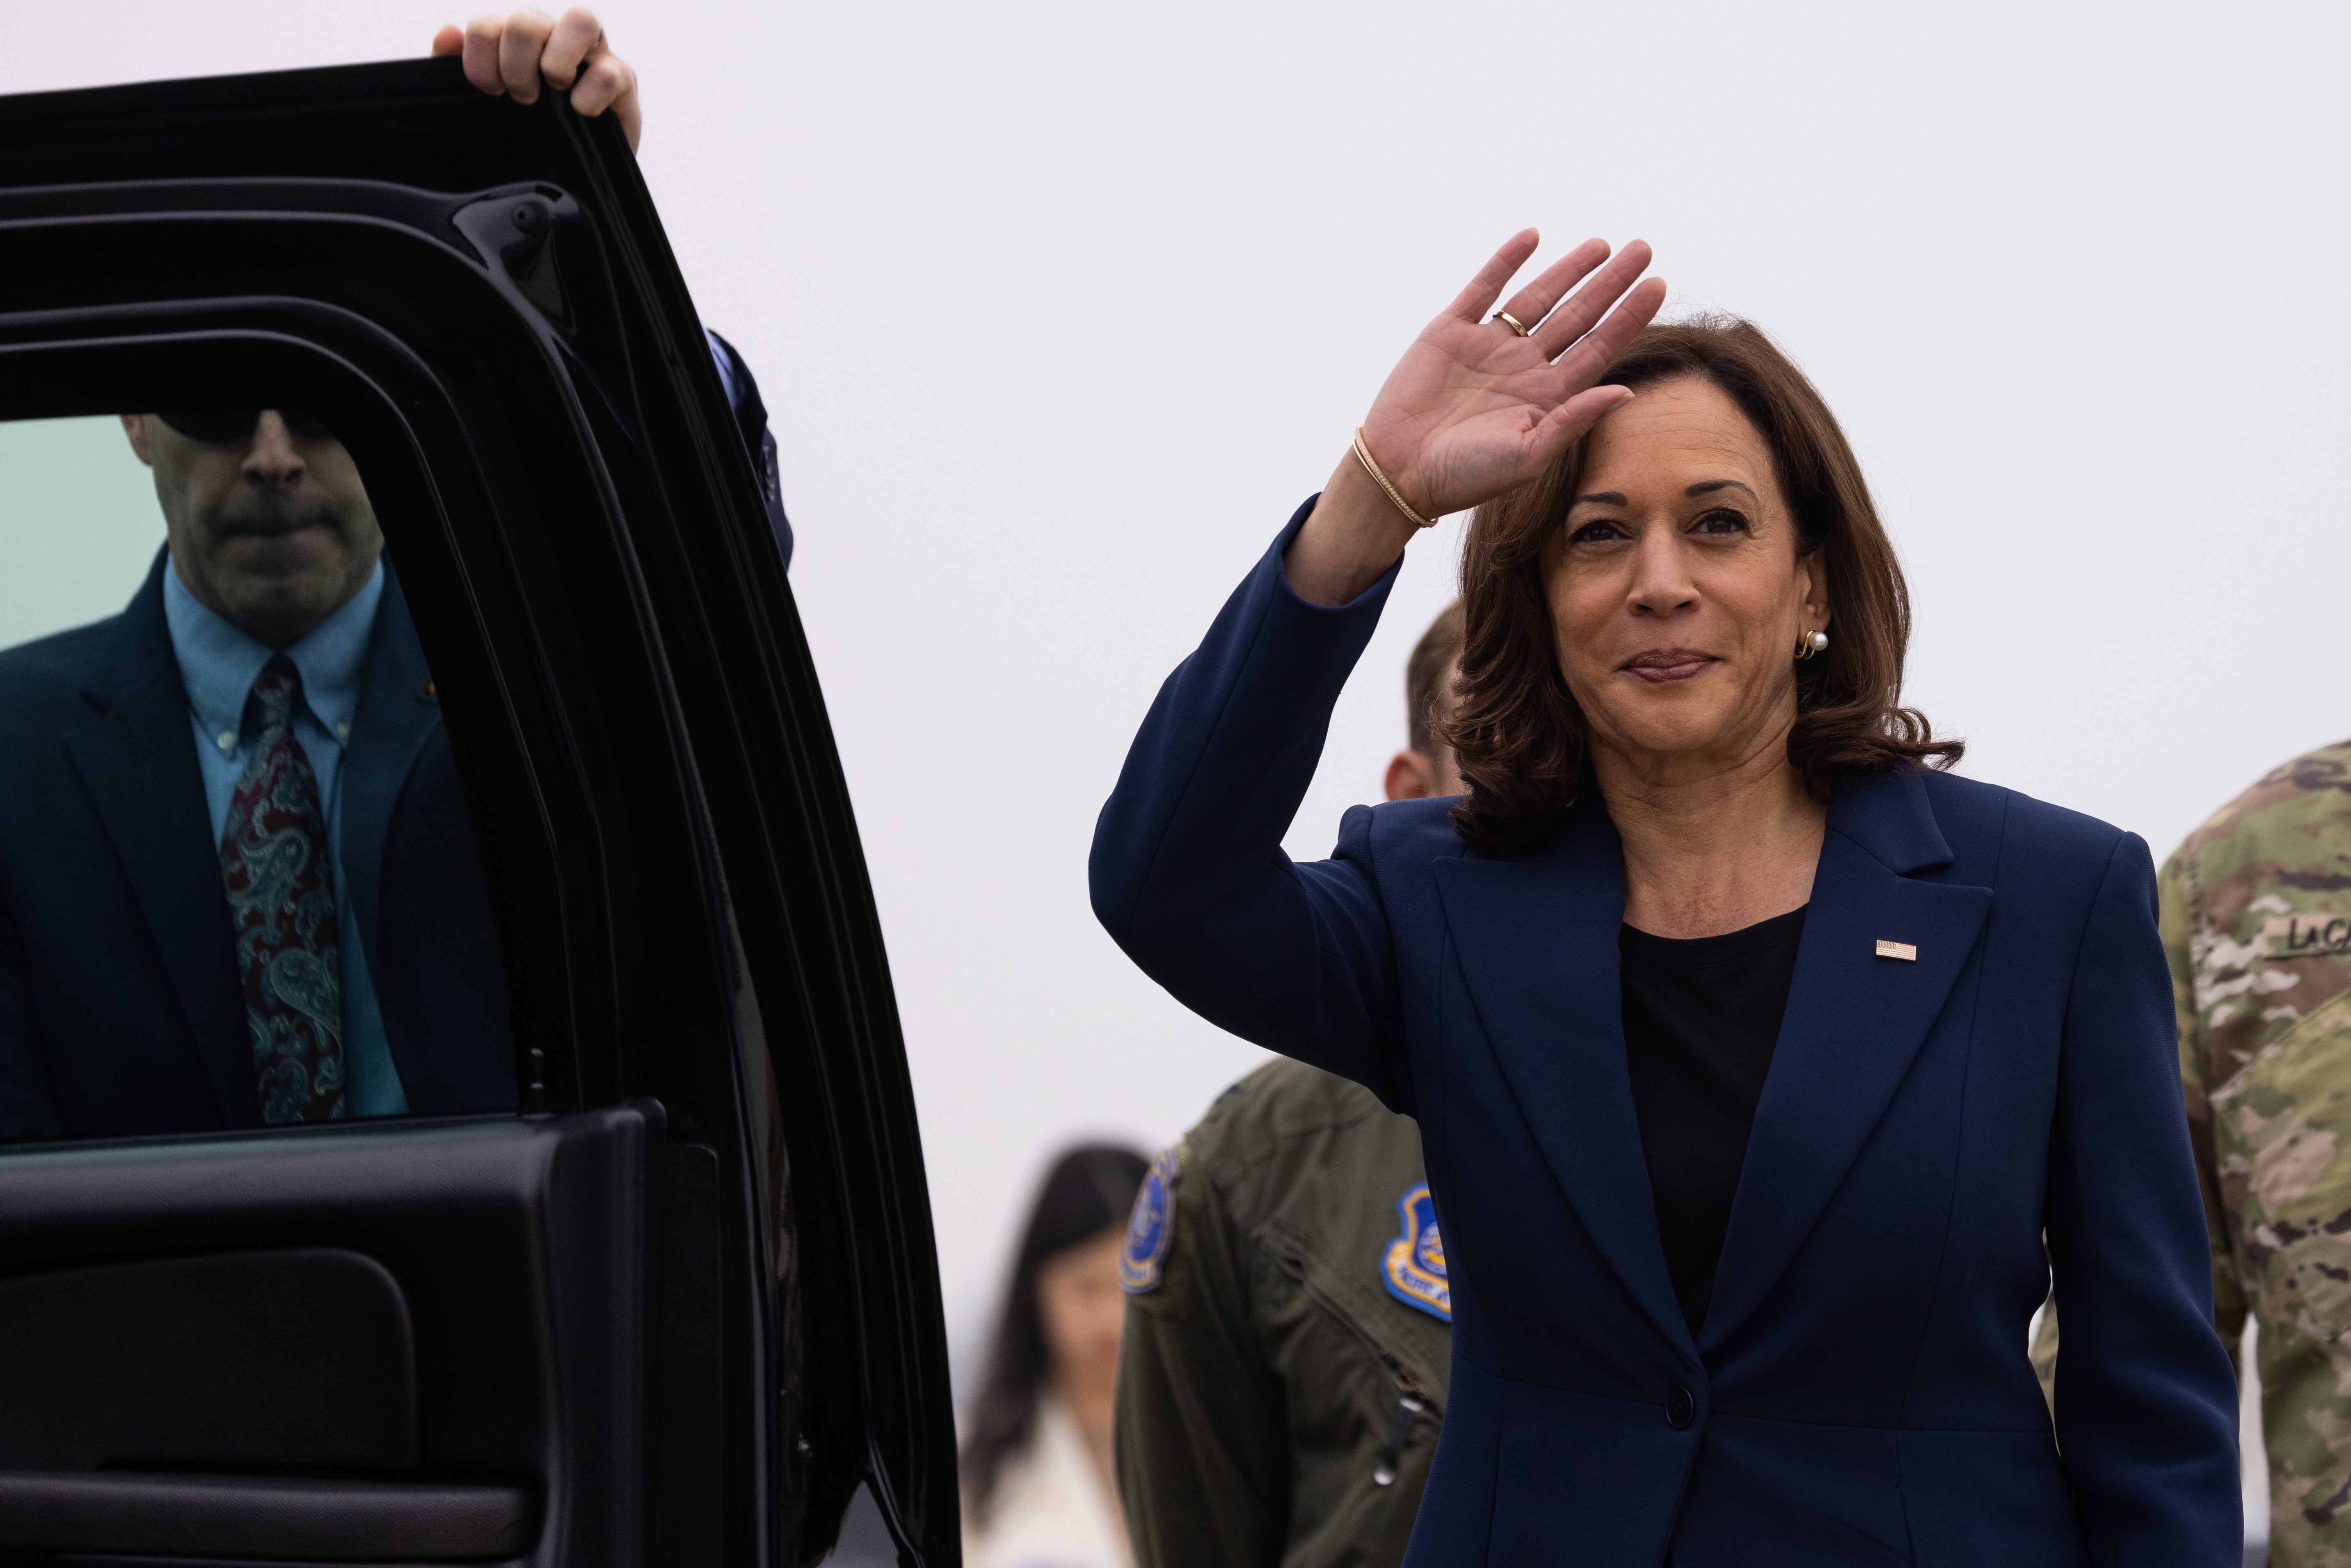 Kamala Harris Heads To Texas For Dinner With Mega Donors But Should She Visit The Border Too